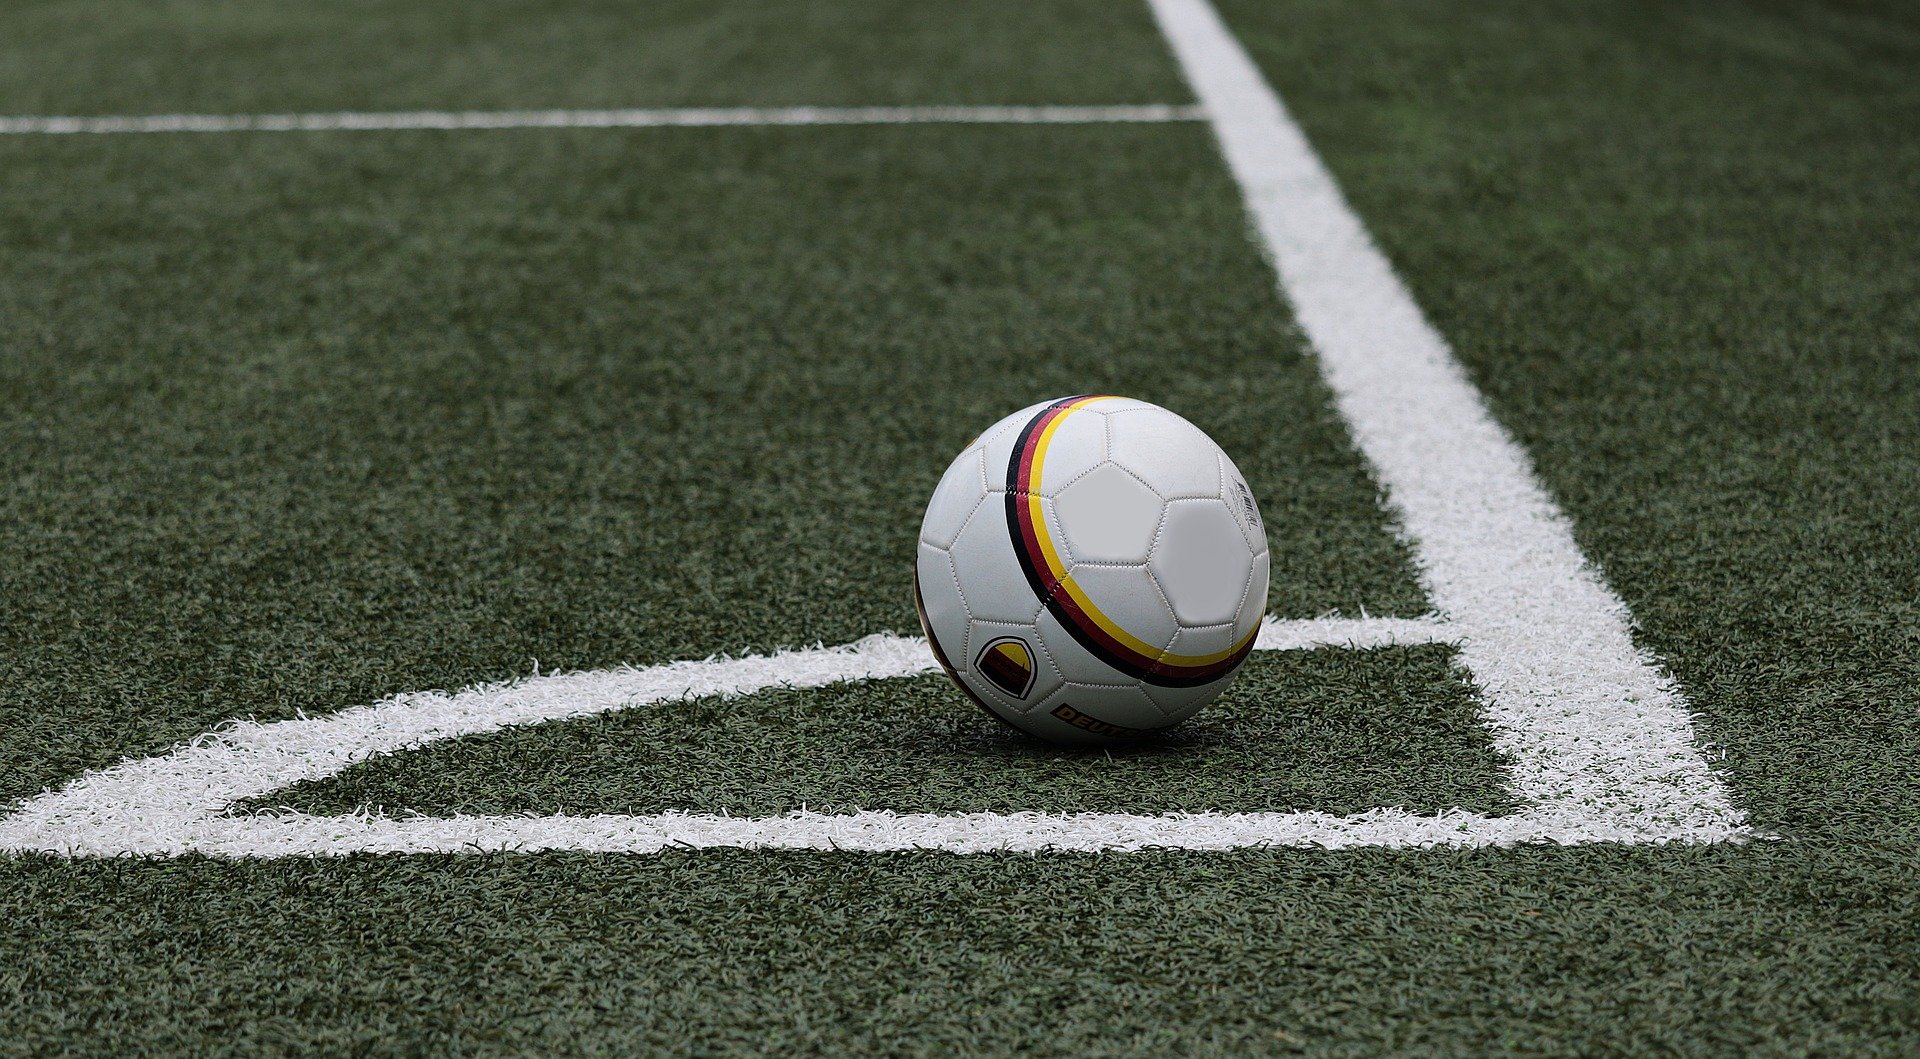 A lone soccerball sitting on a soccer field | Photo: Pixabay/S. Hermann & F. Richter